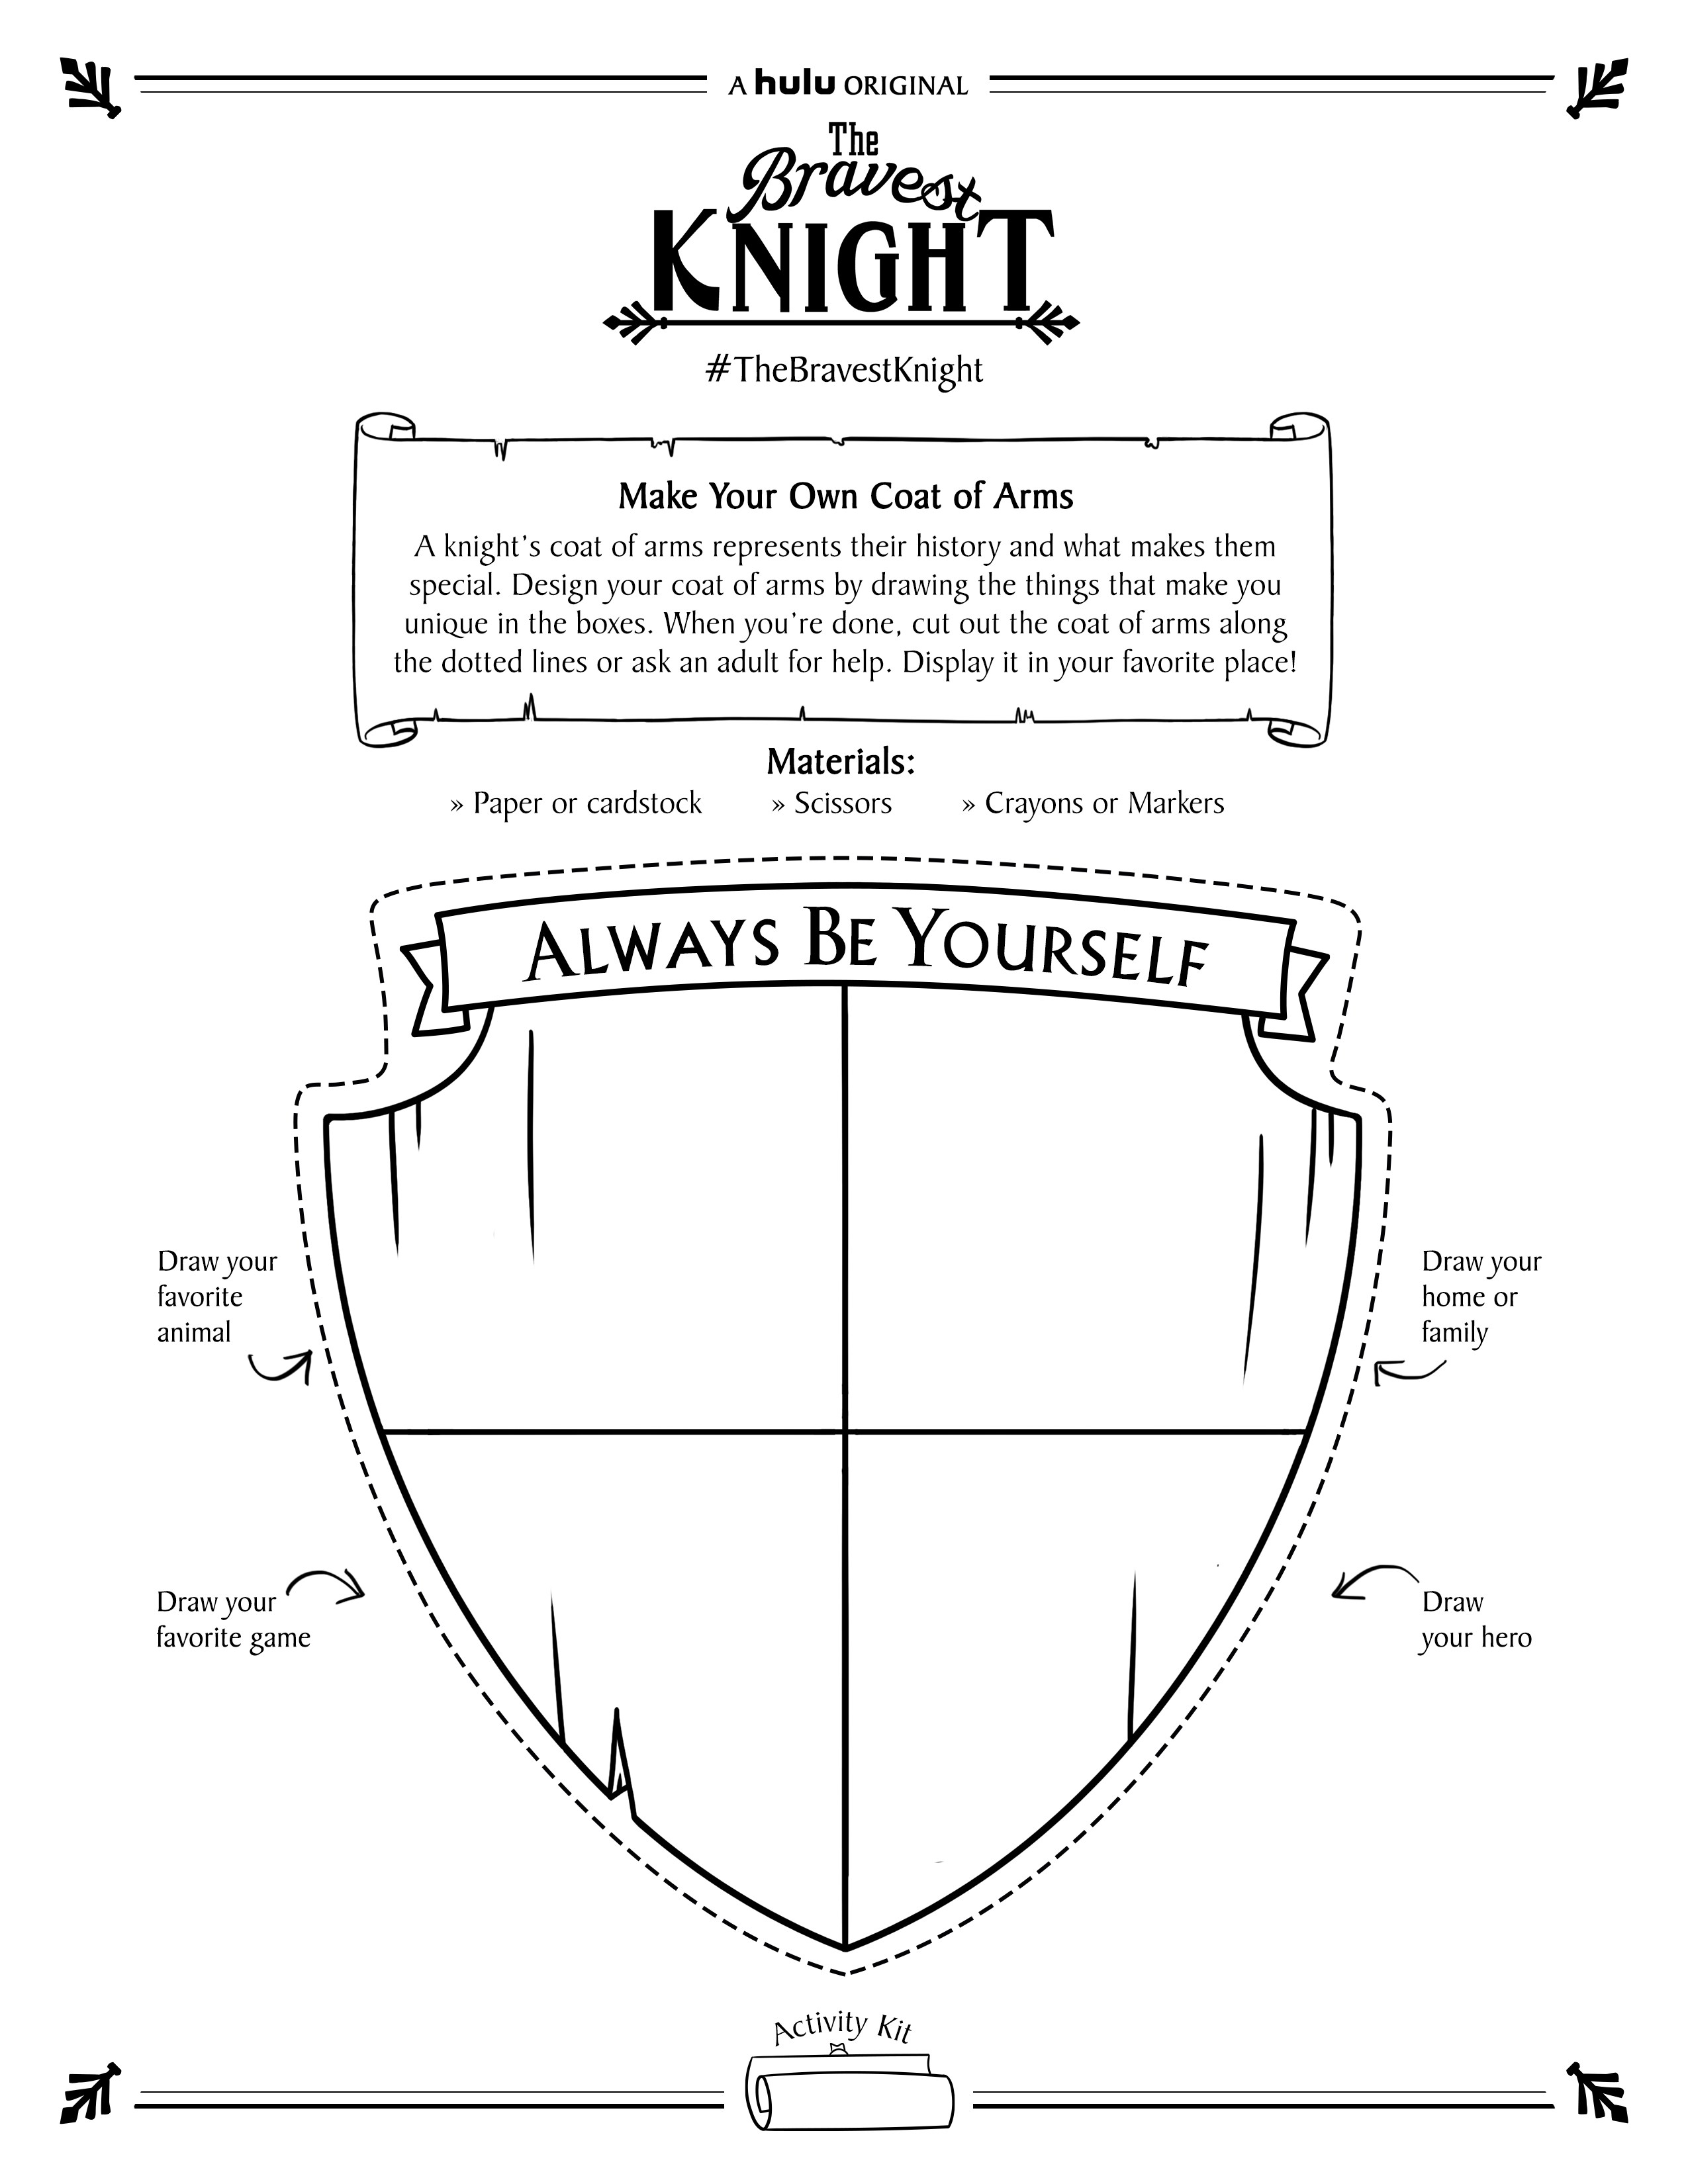 The bravest knight coloring and activities page